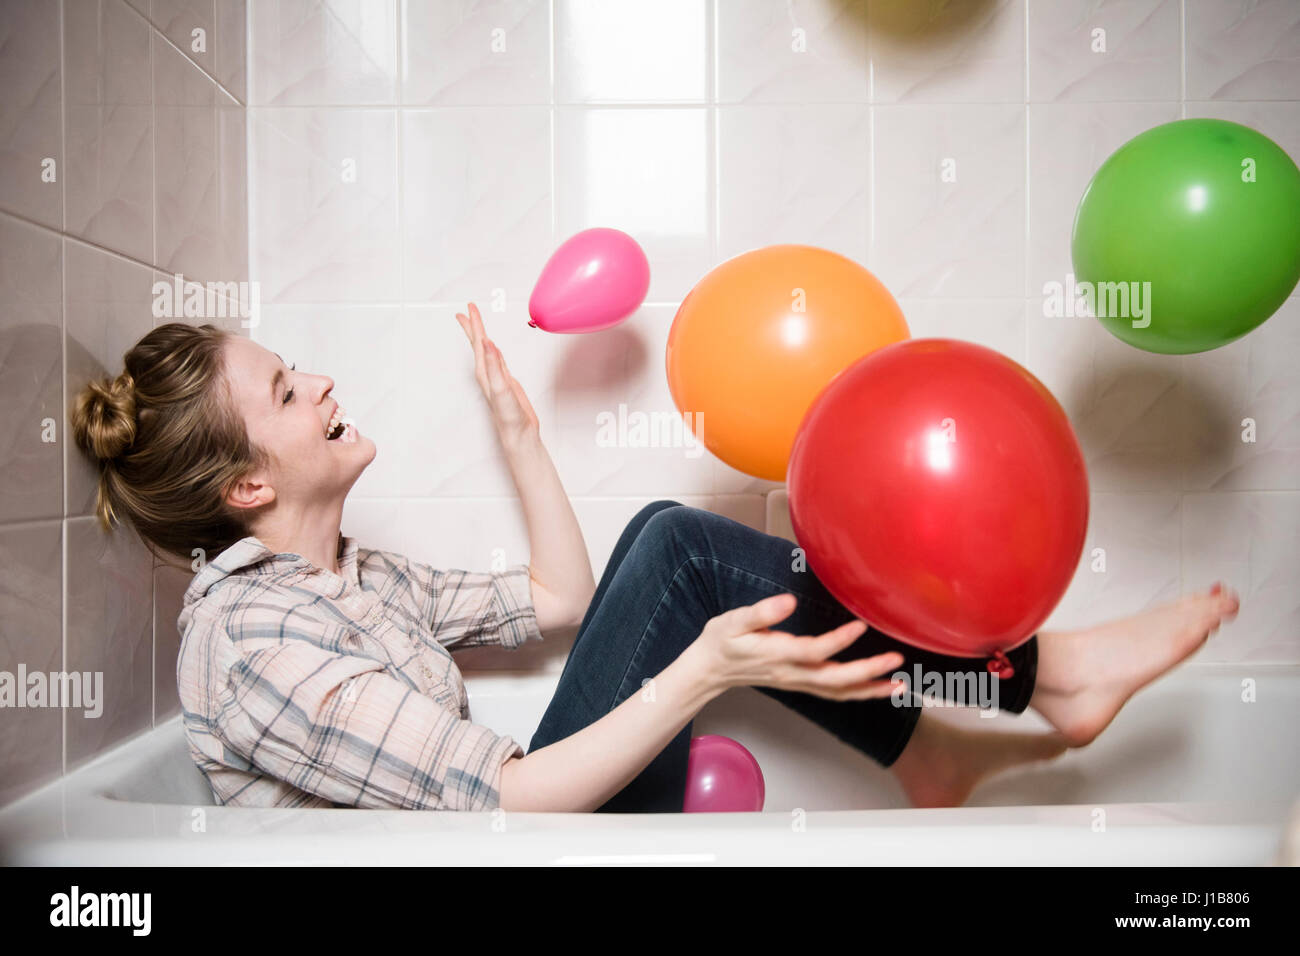 Laughing woman sitting in bathtub playing with multicolor balloons Stock Photo